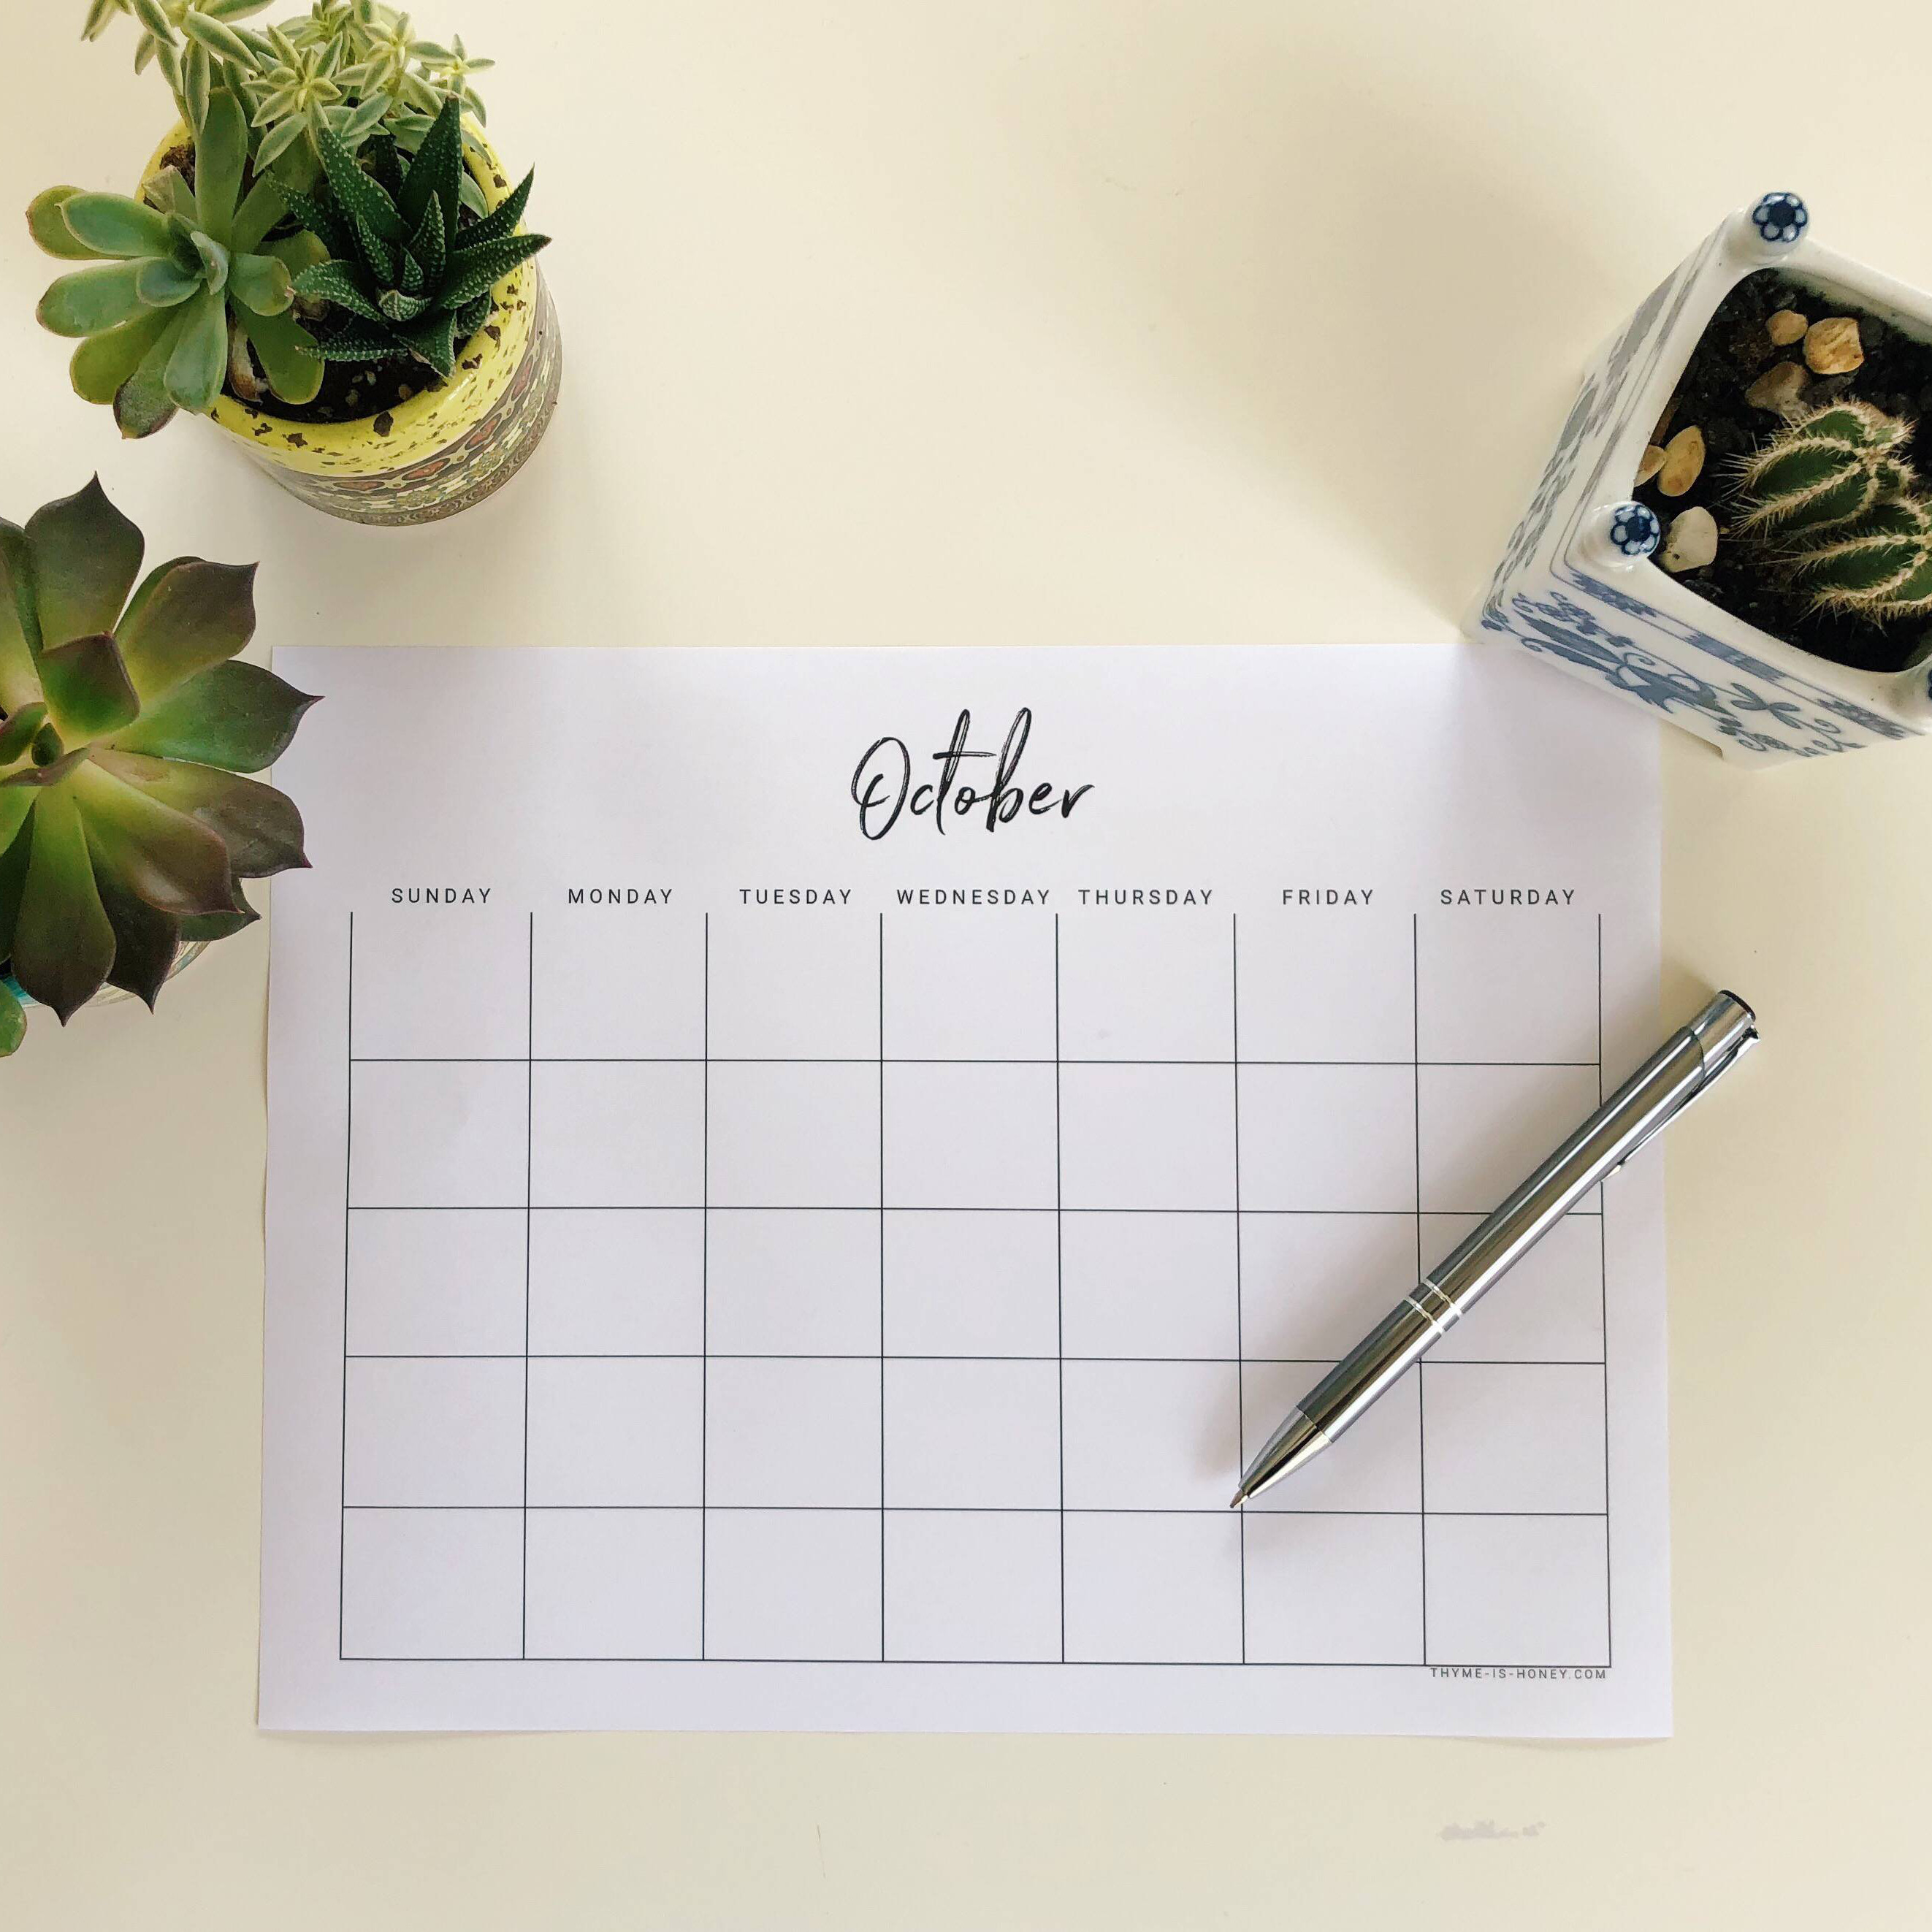 A monthly calendar from October. Calendars and planners are excellent organizational tools that can help reduce stress at work through better planning.